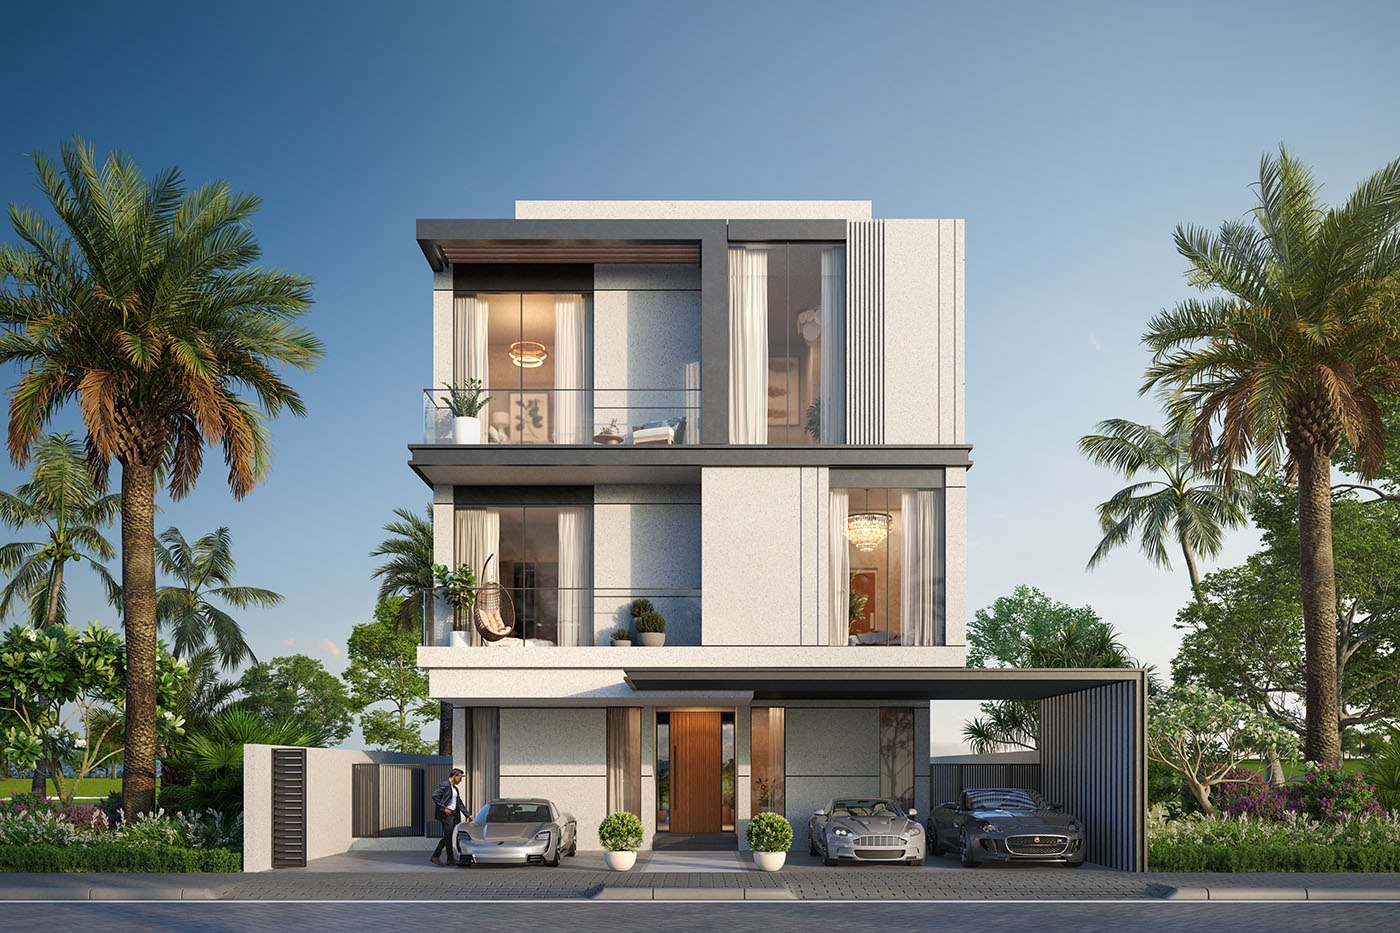 Villa renders are becoming more and more popular in the MENA region